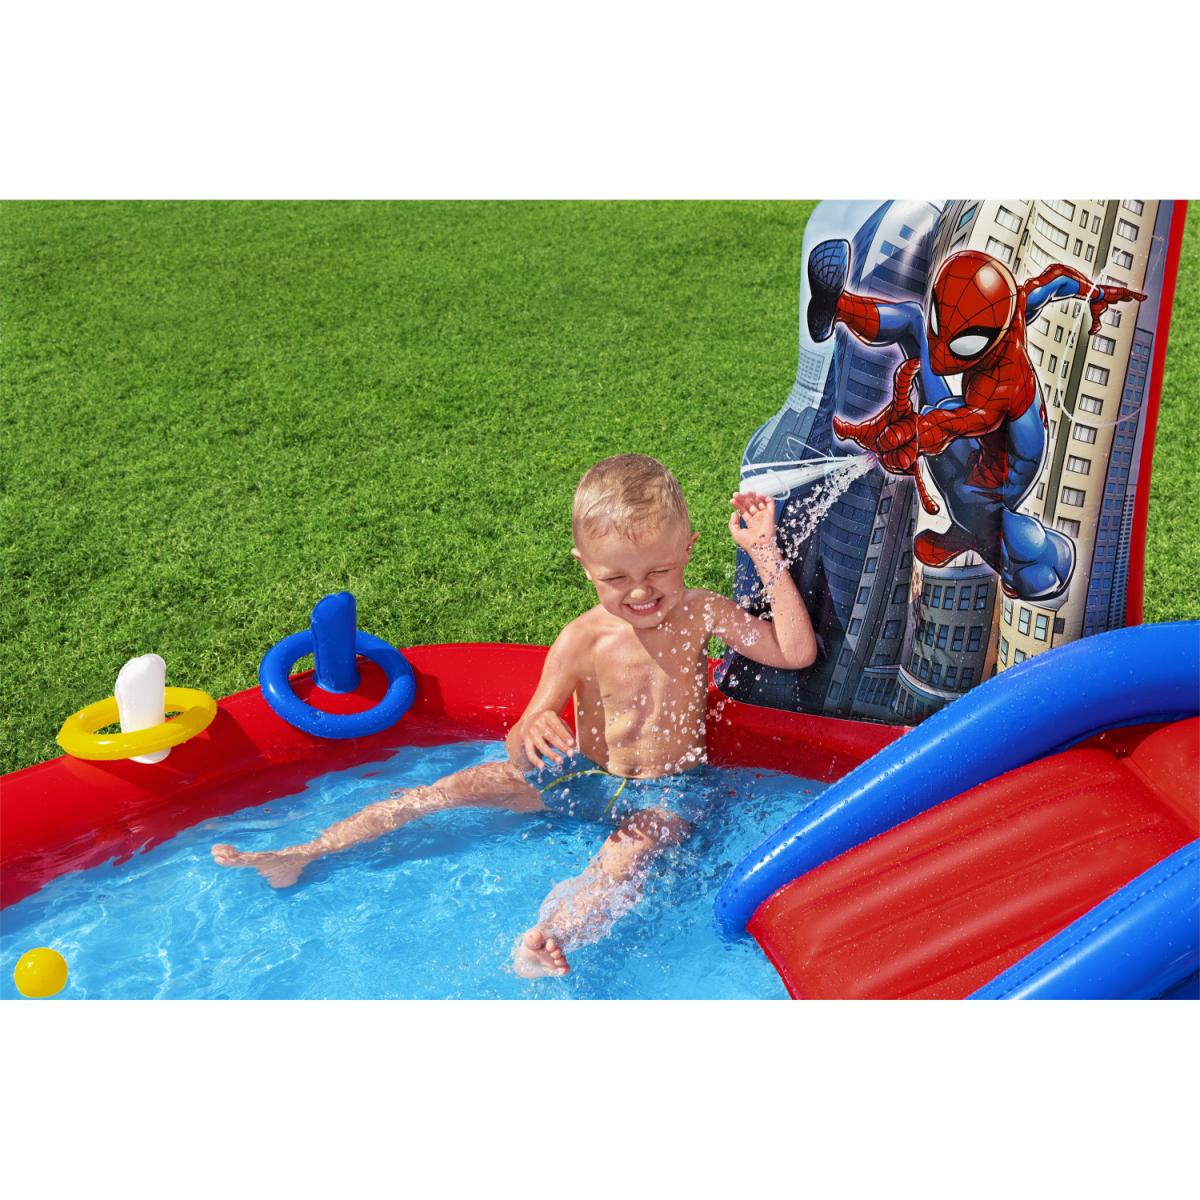 PLAYSET INFLABLE SPIDERMAN 2.11X2.06X1.2